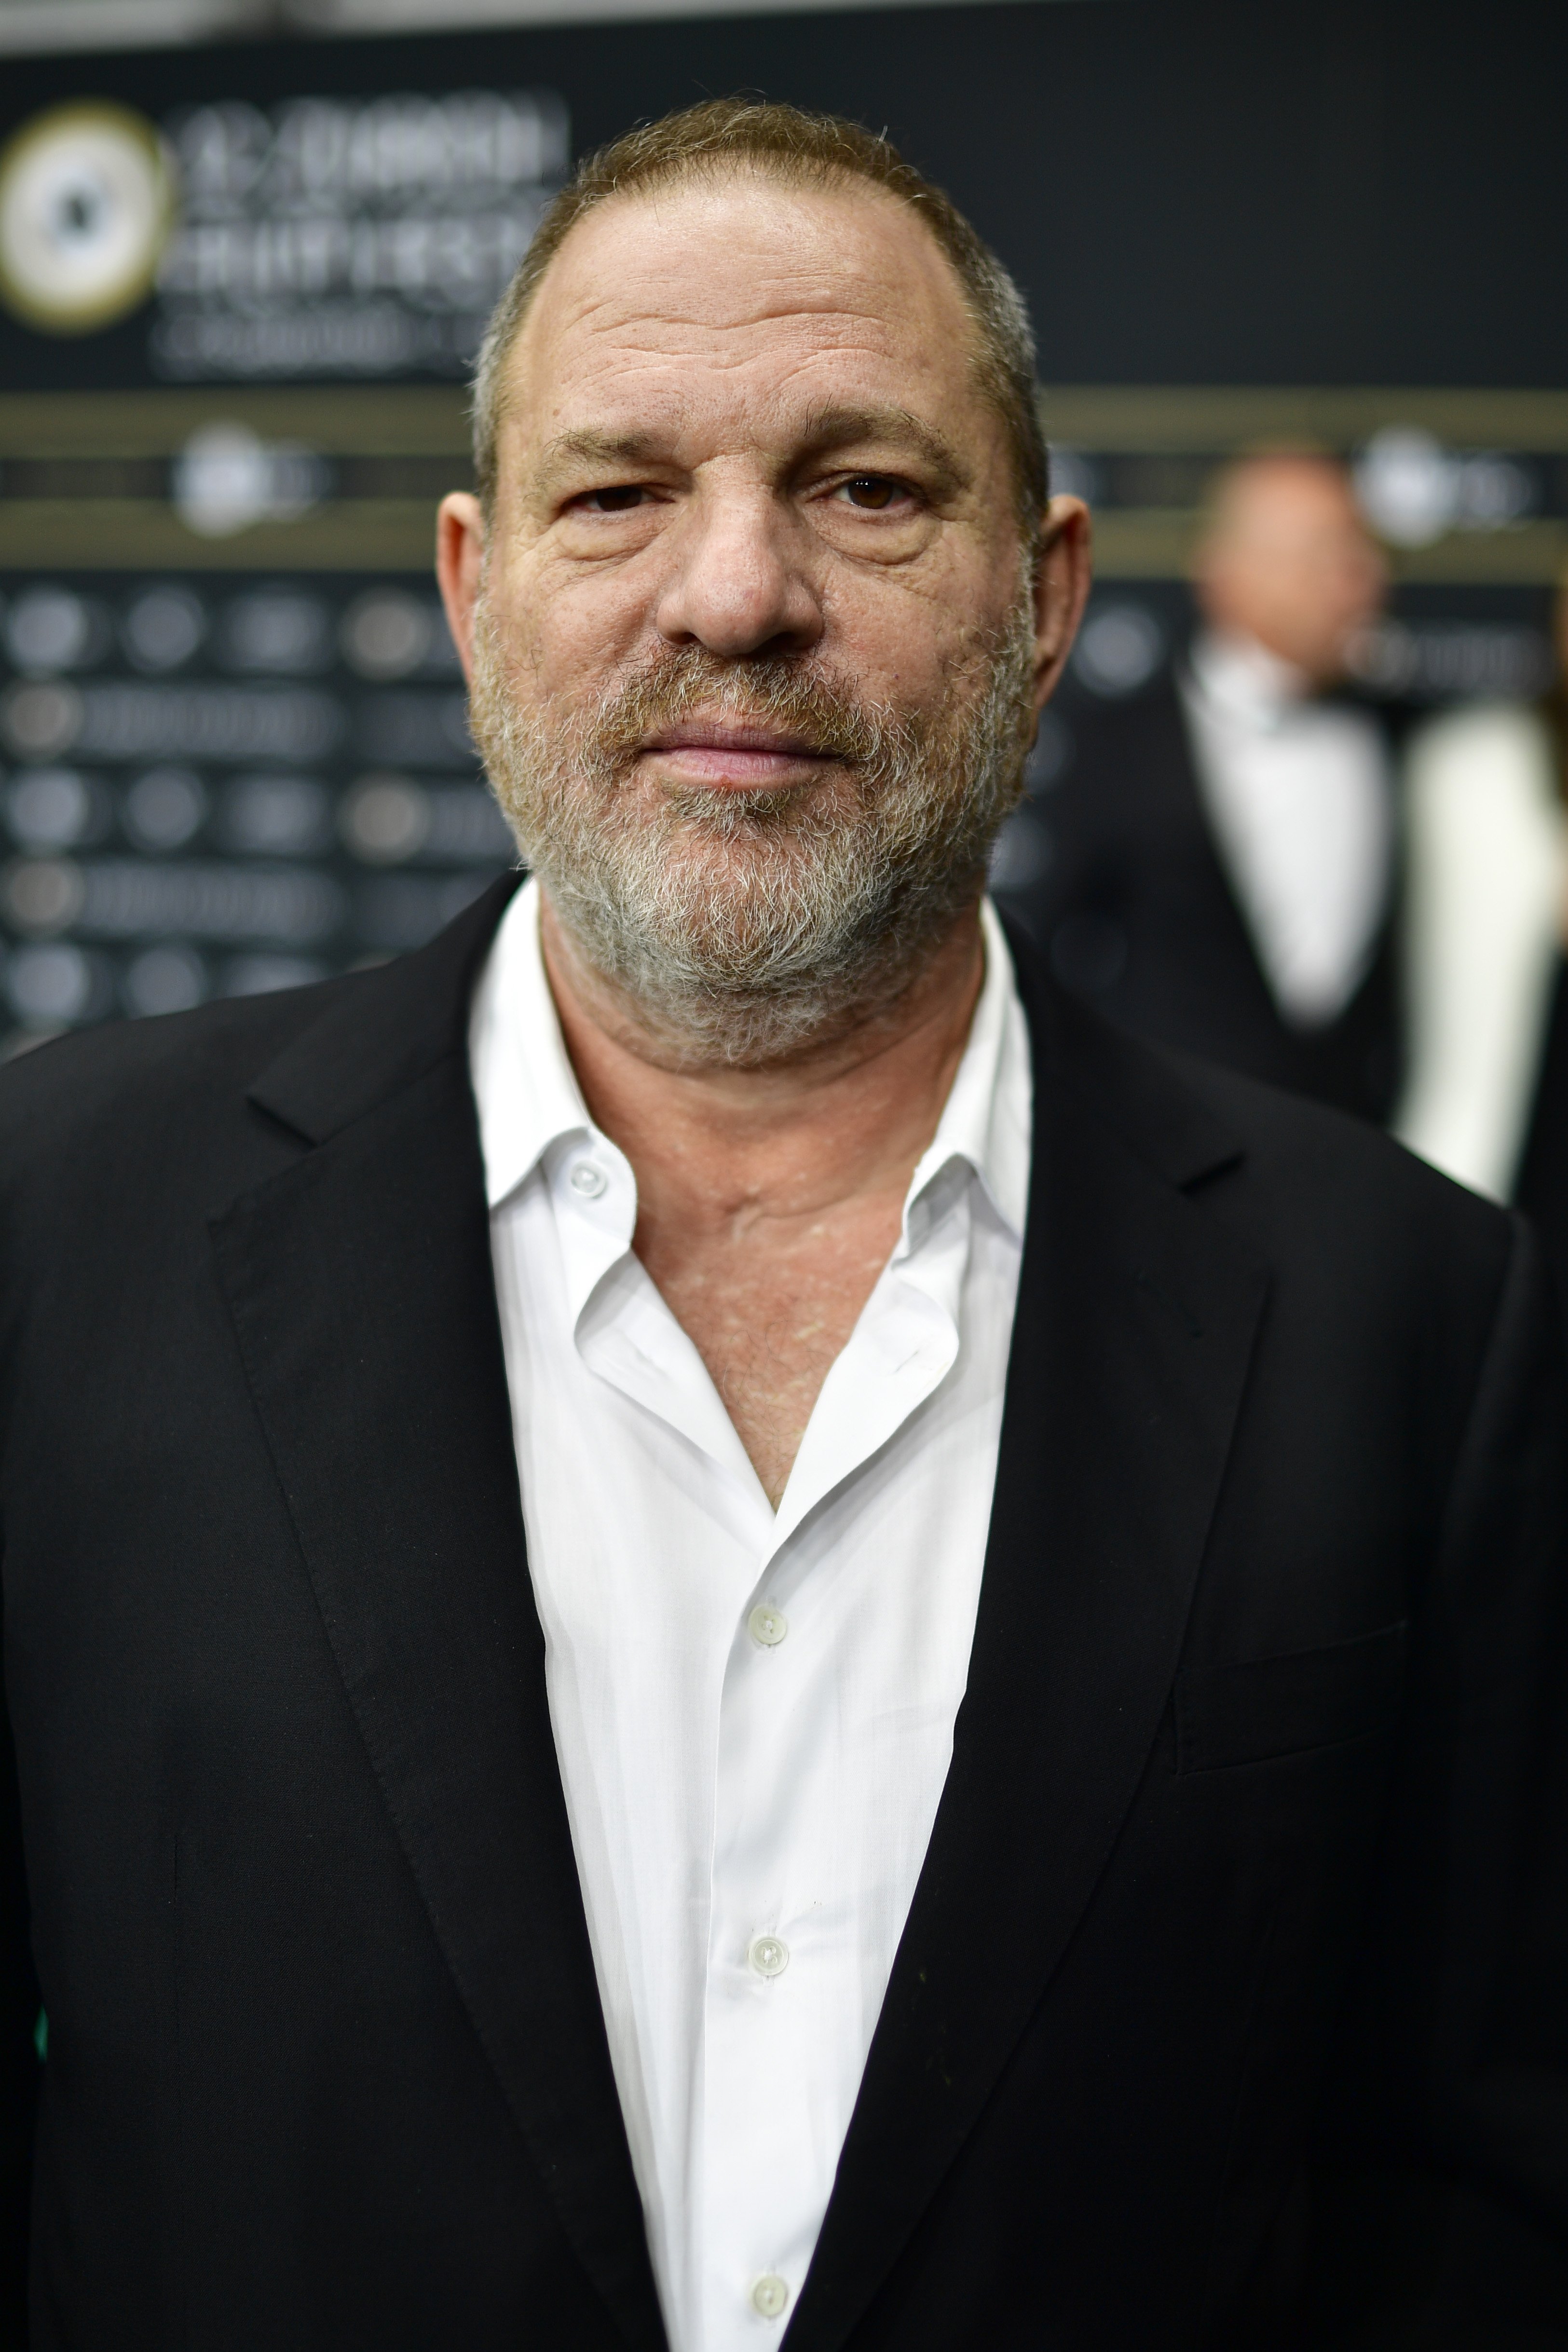 Harvey Weinstein attends the 'Lion' premiere and opening ceremony of the 12th Zurich Film Festival on September 22, 2016. | Source: Getty Images